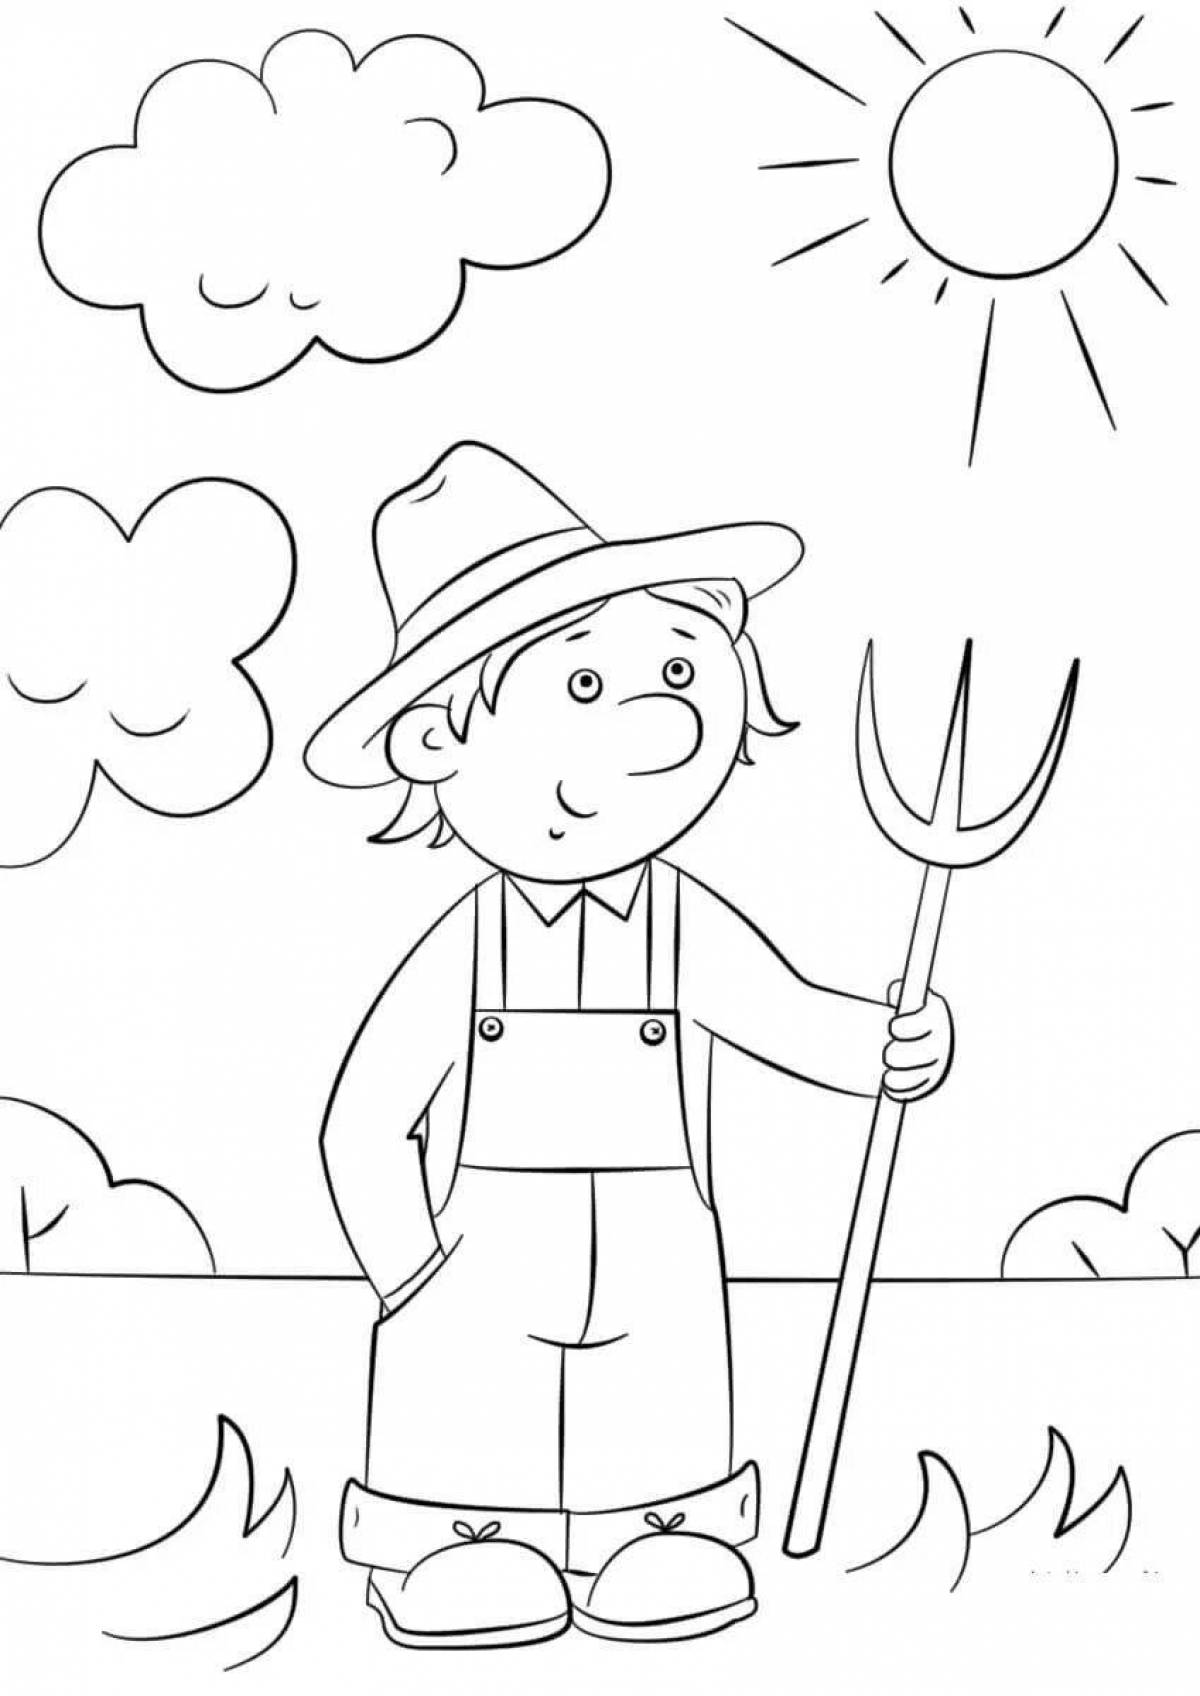 Colorful farmer coloring page